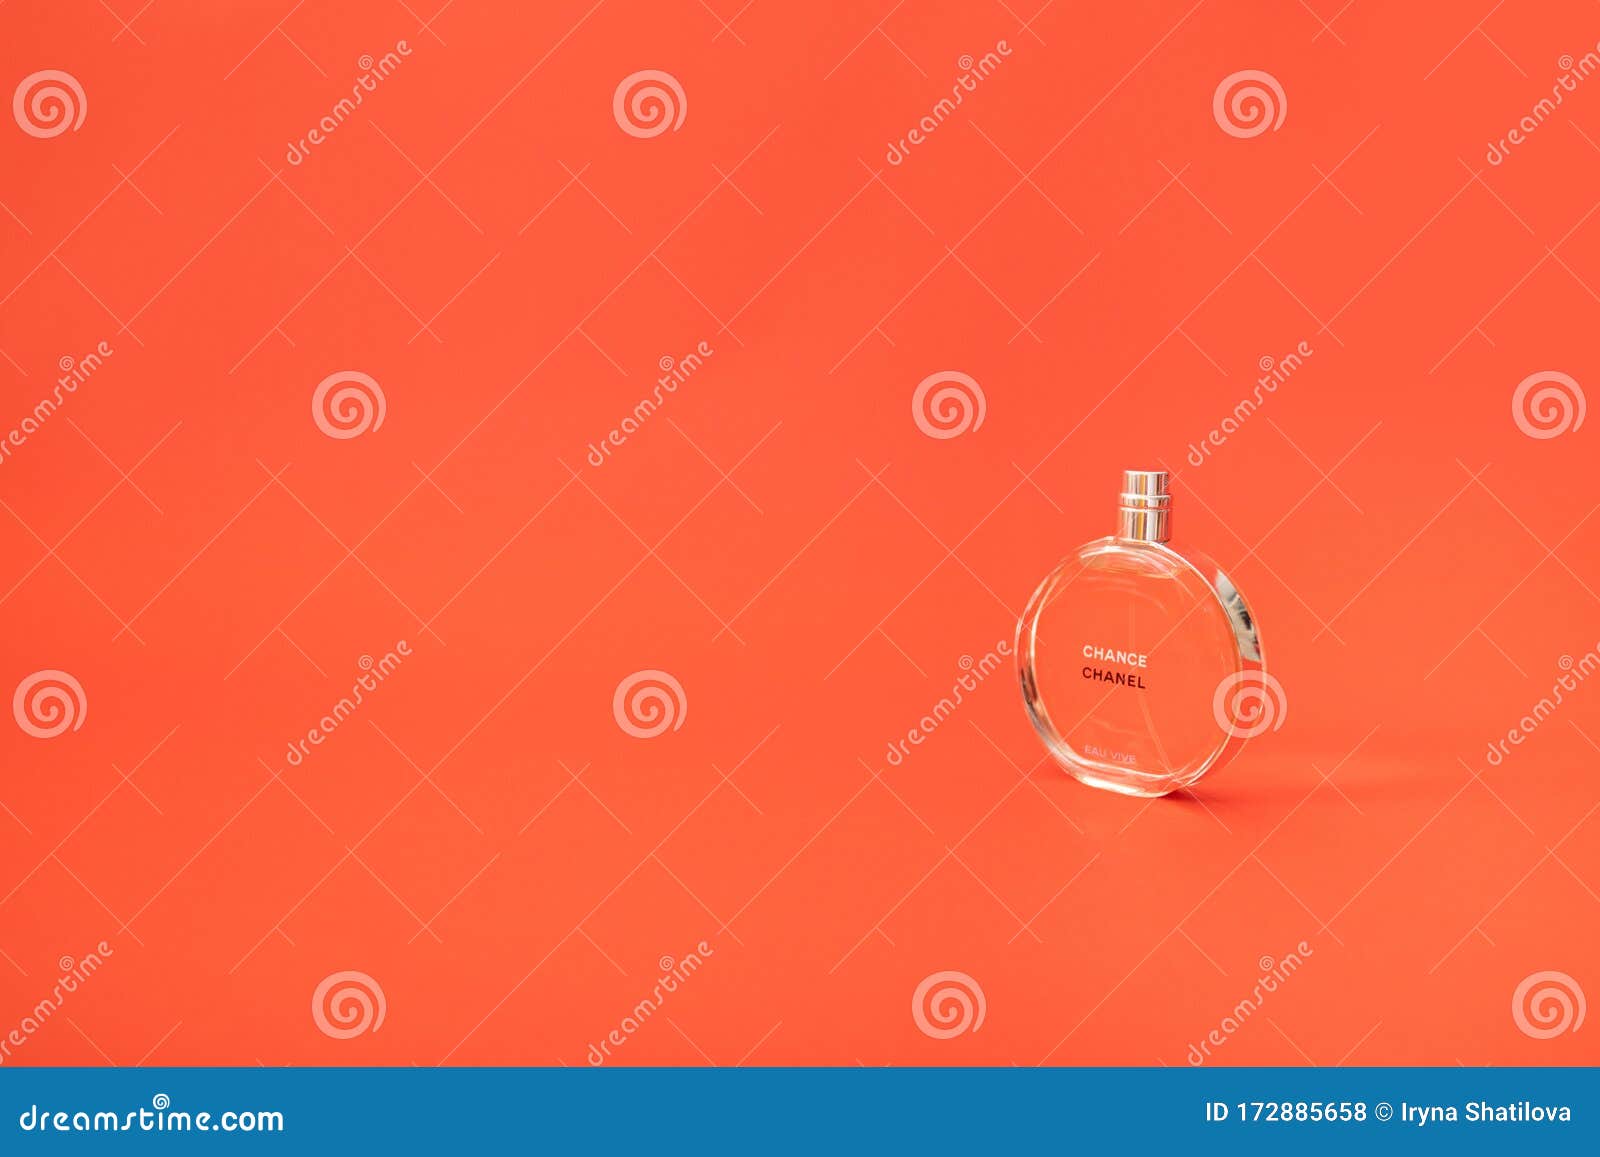 Perfume chanel Stock Photos, Royalty Free Perfume chanel Images